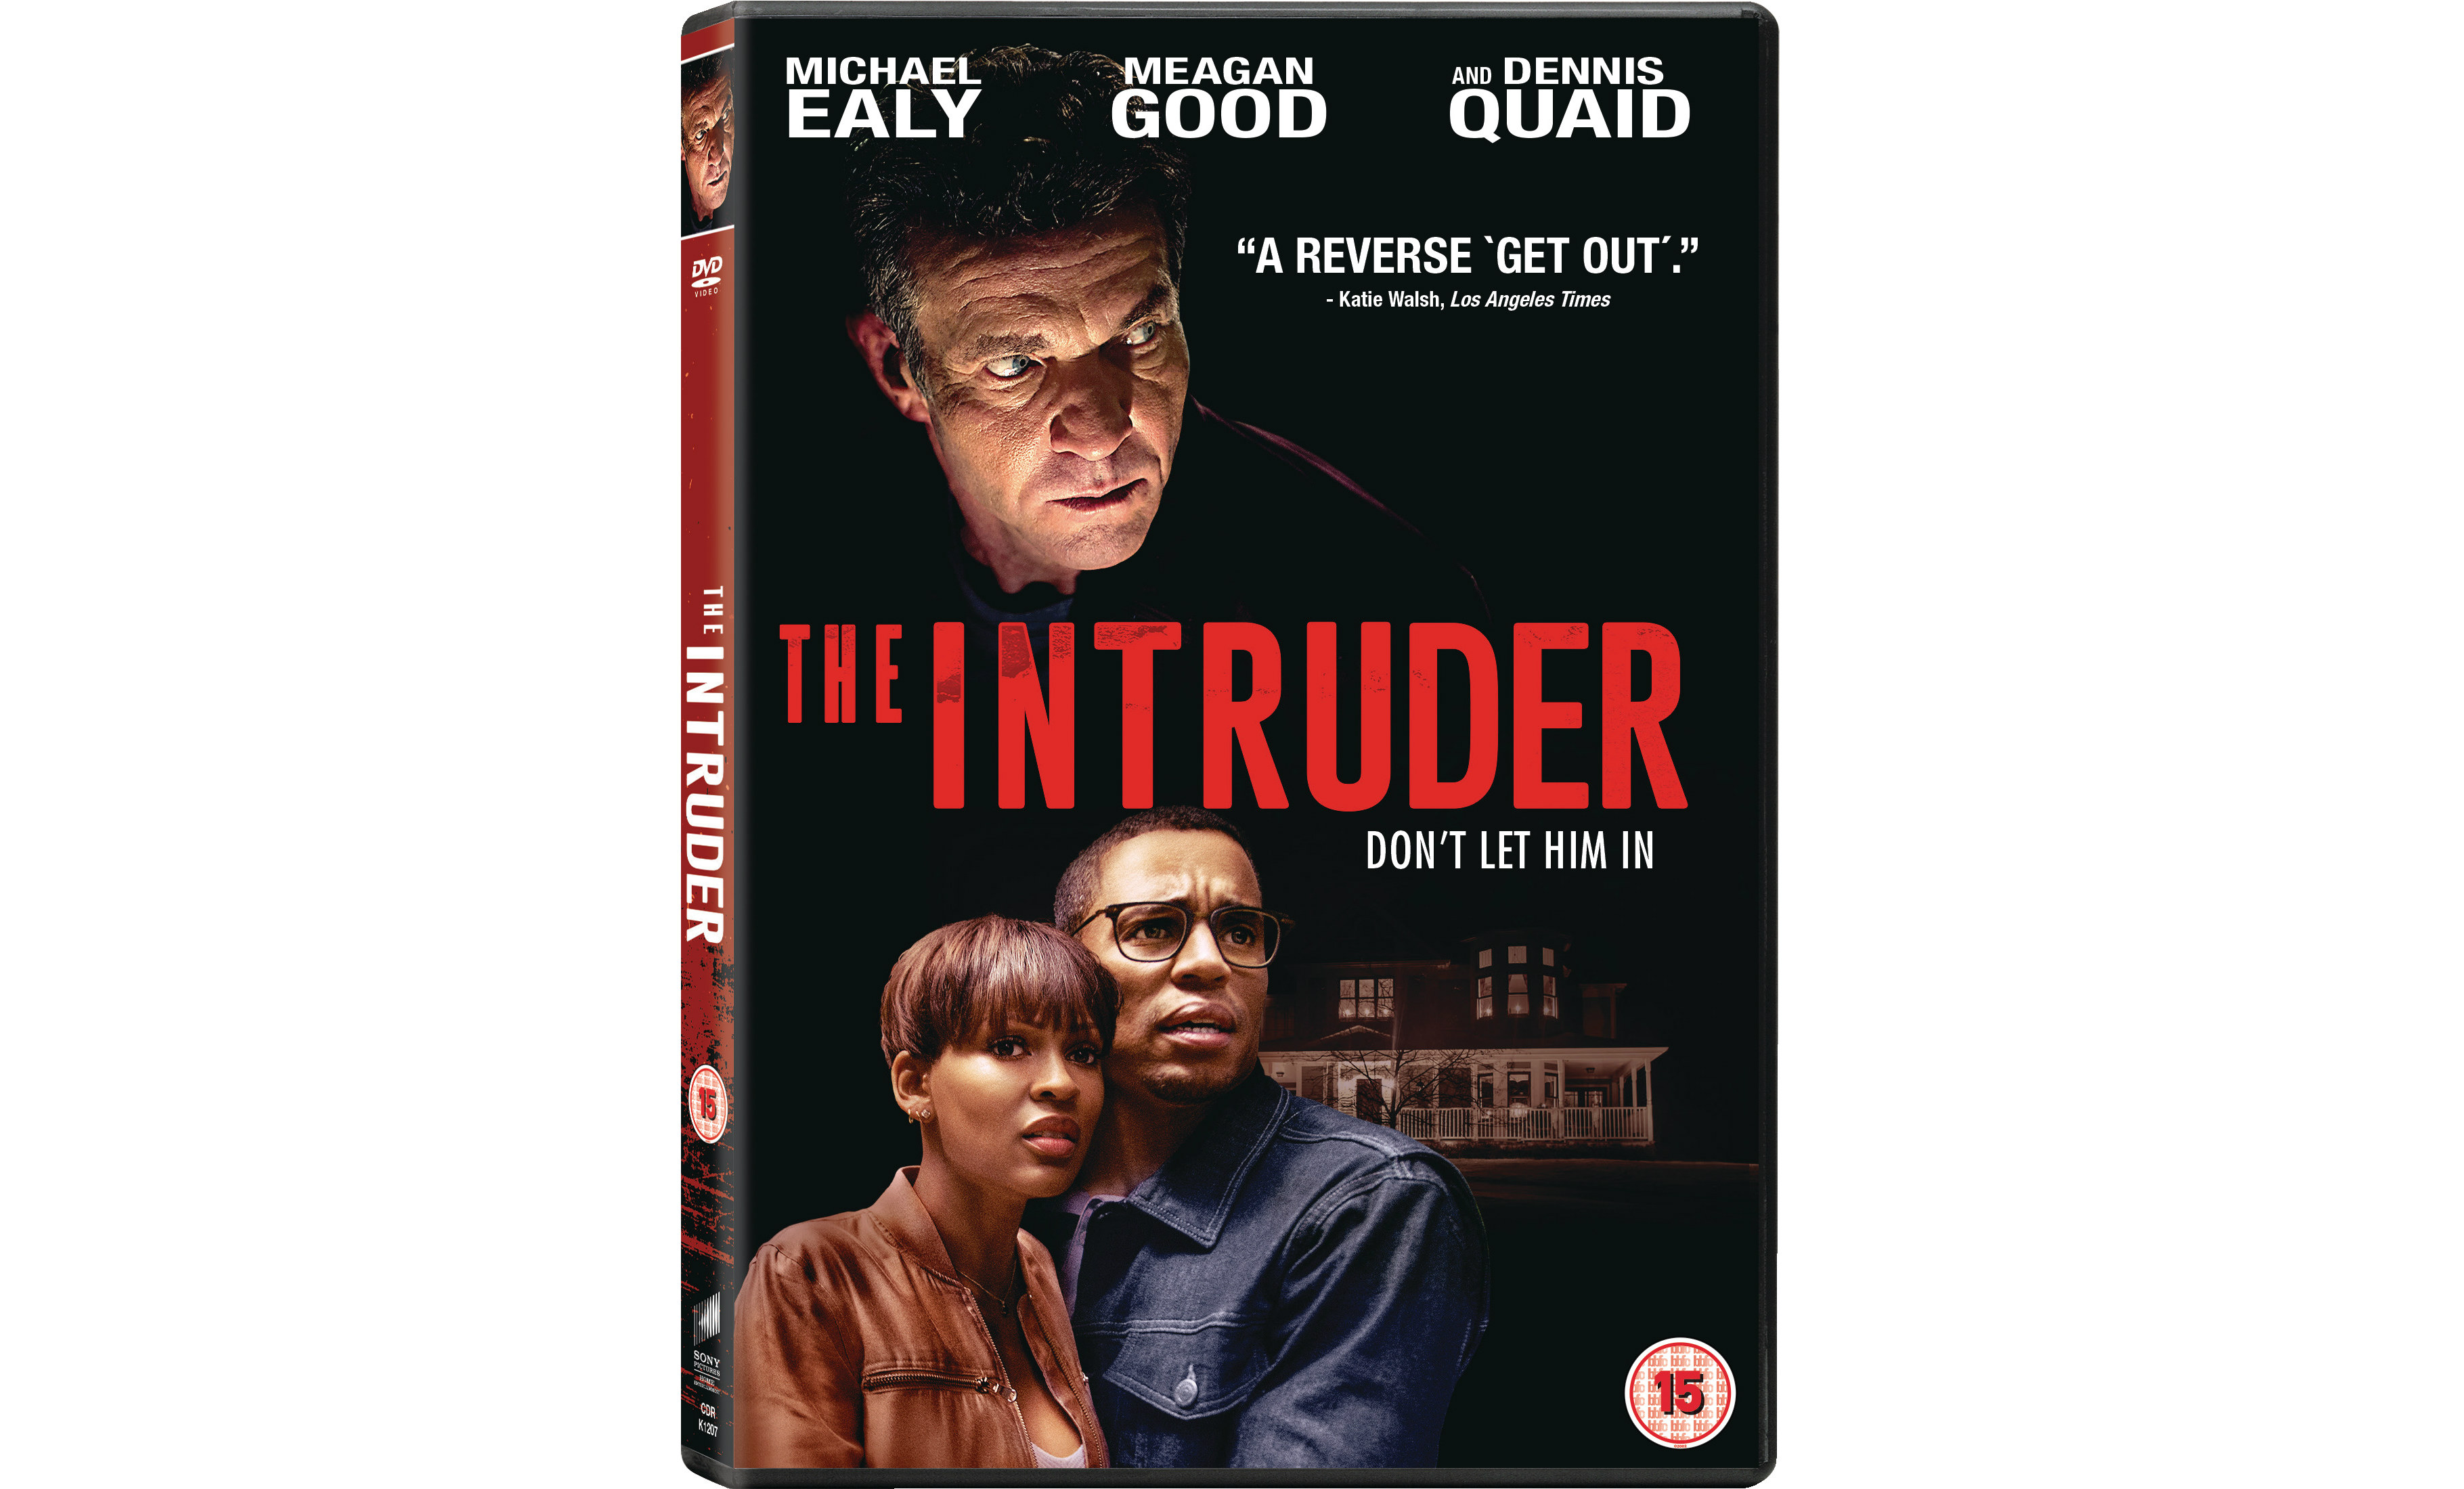 Review: Is Quaid's performance in 'The Intruder' career-ending, or a career  highlight?